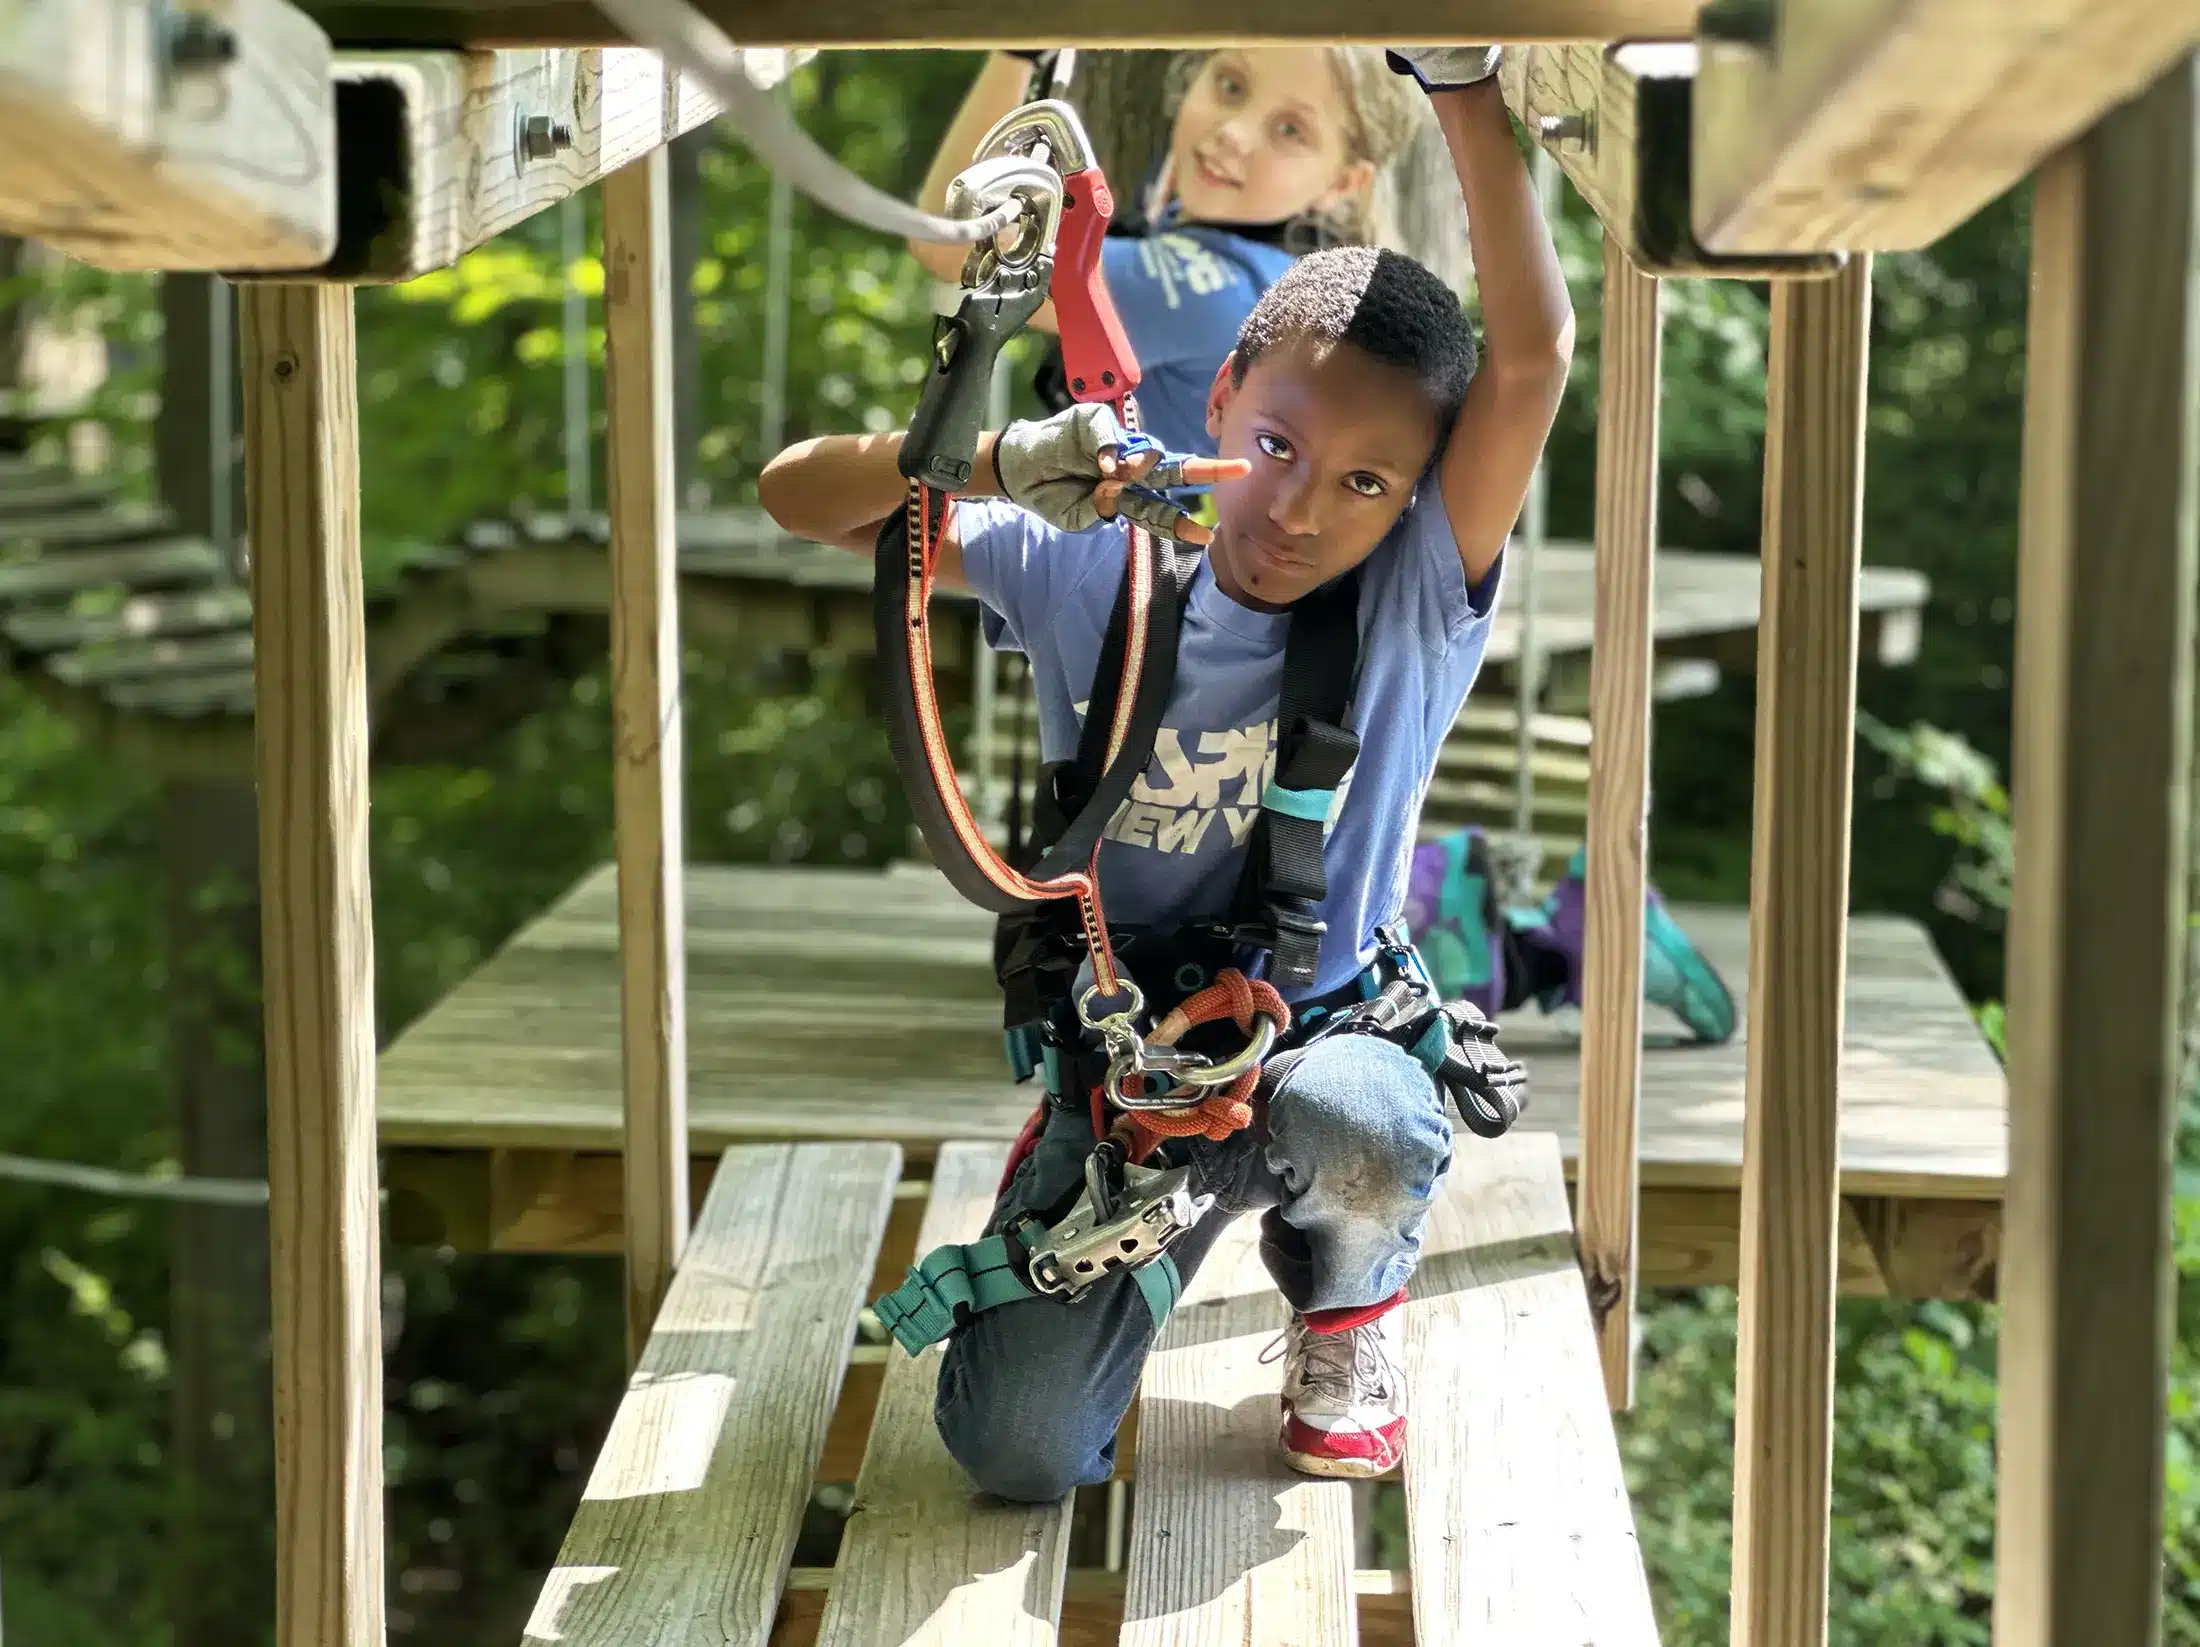 A boy on the beginner level difficulty at Boundless Adventure park